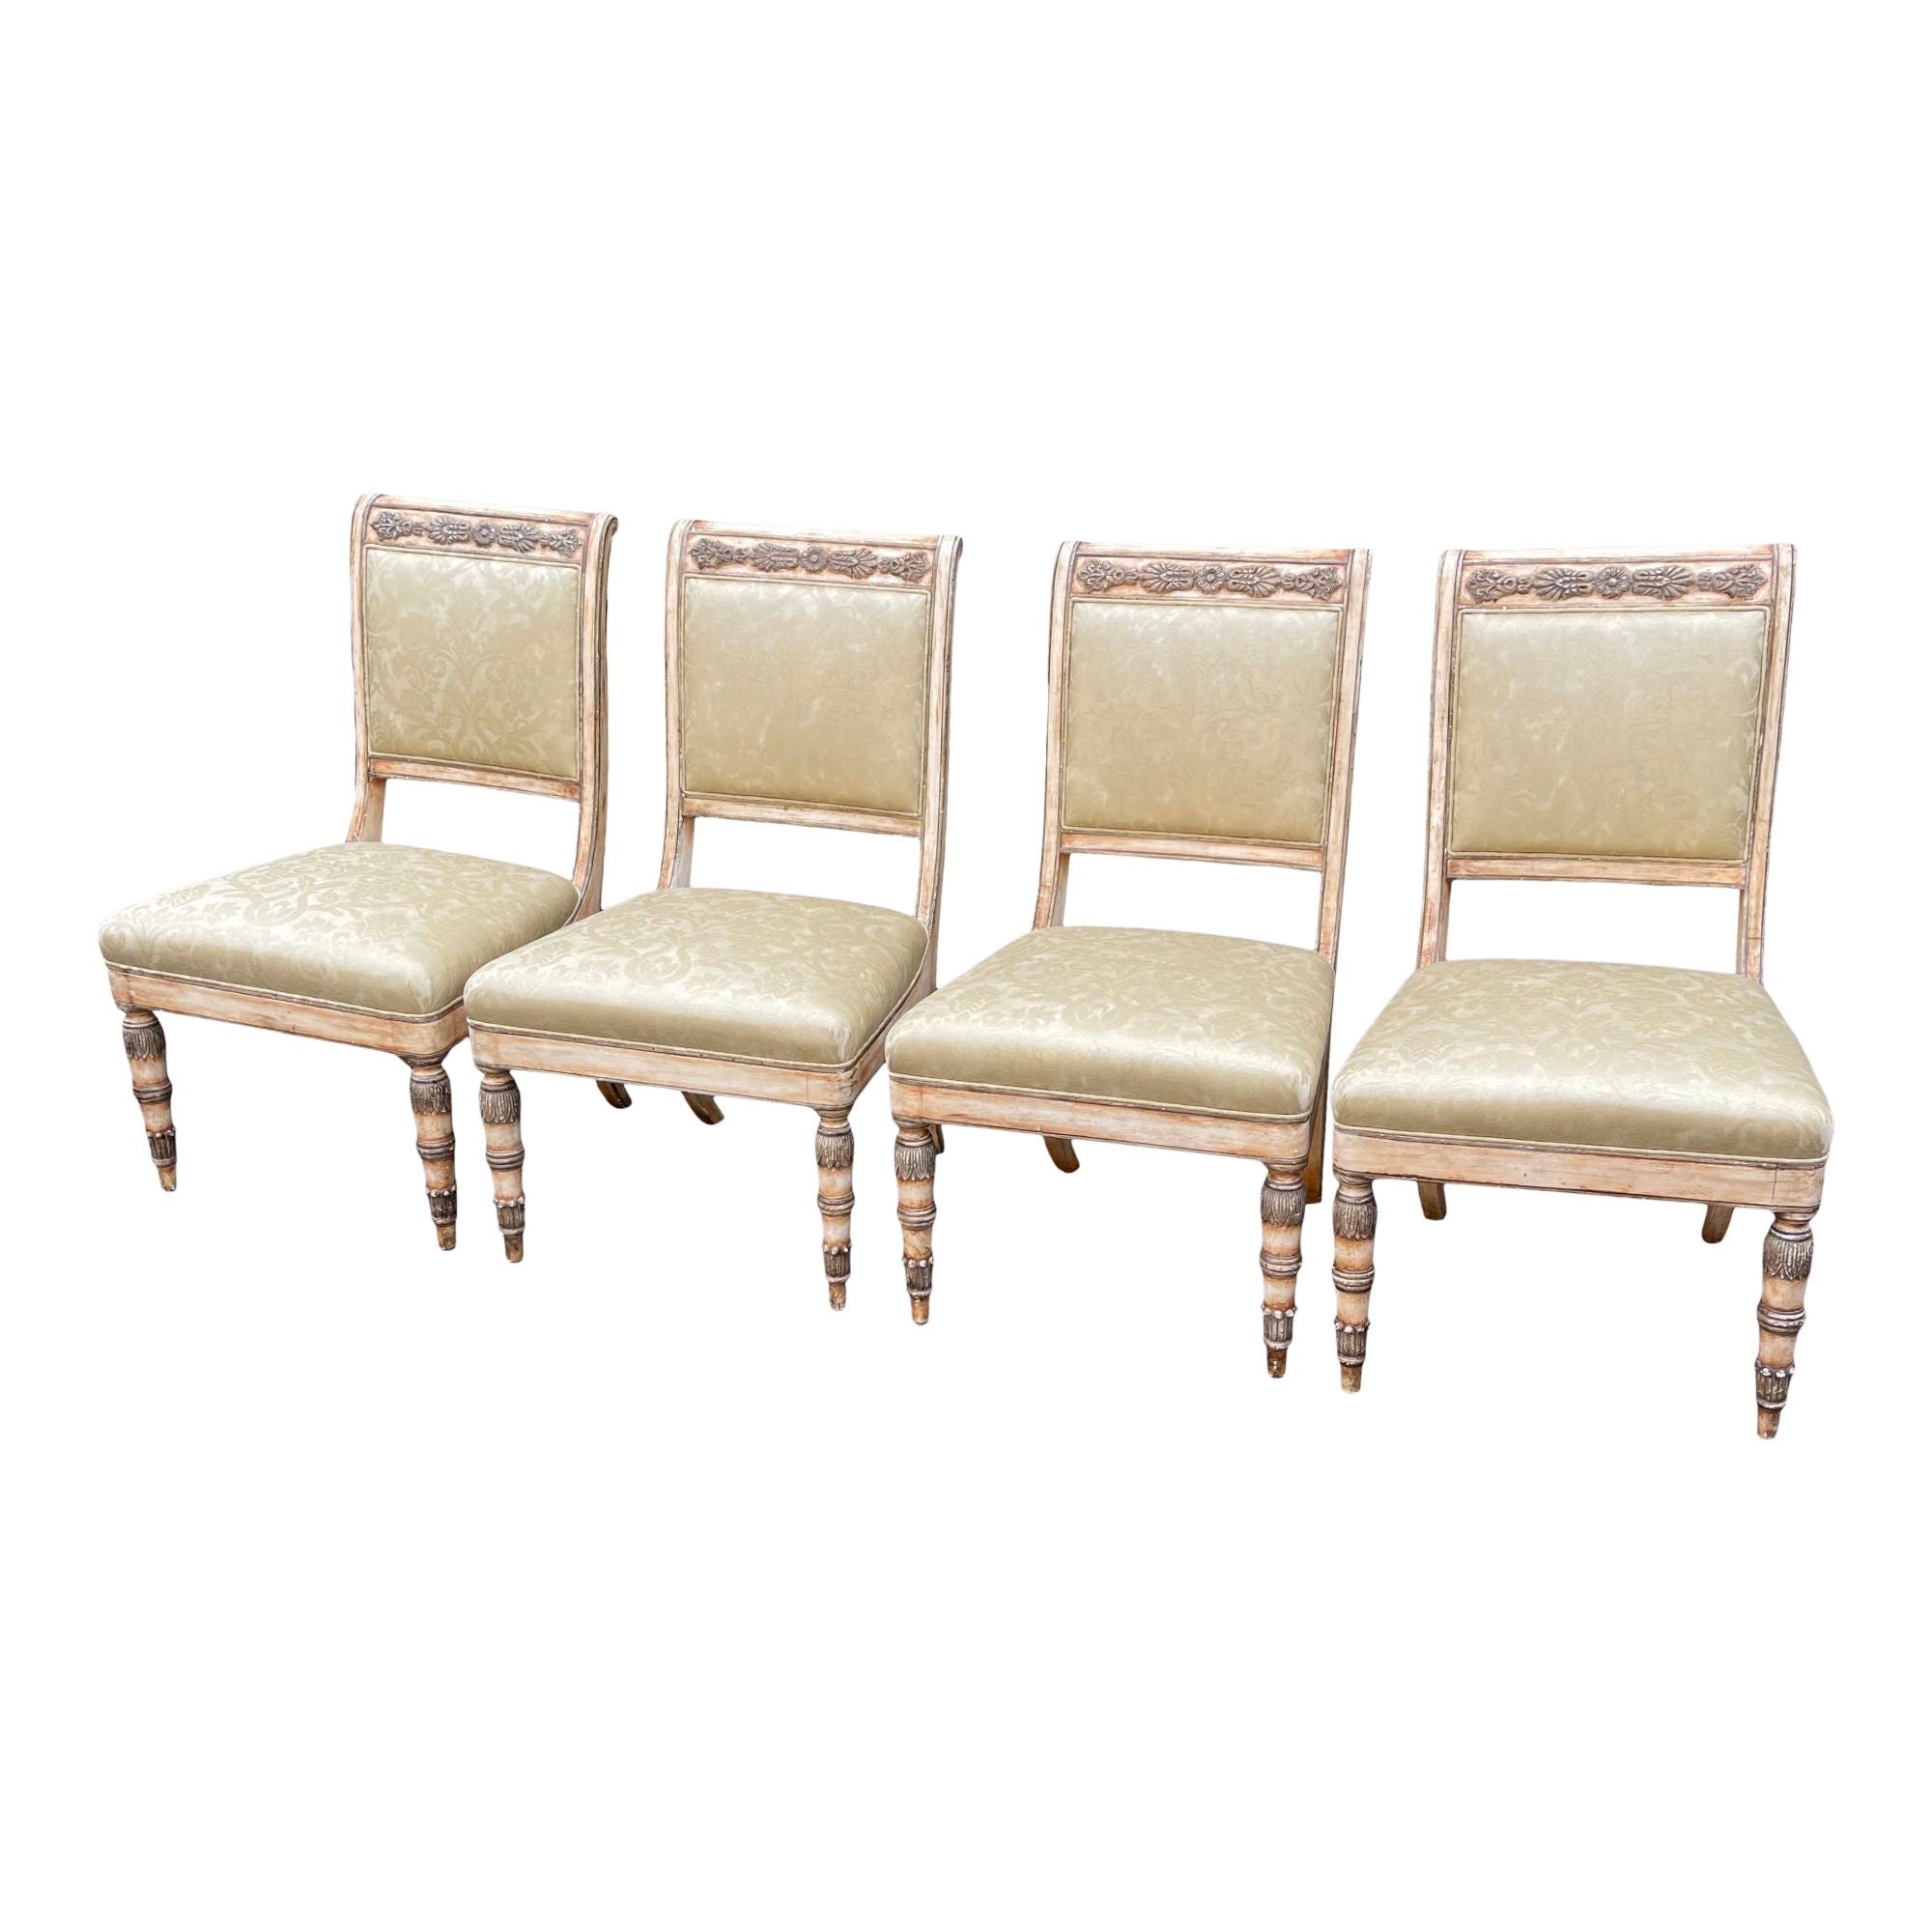 Set of 4, 19th C Style Charles Pollock Russian Imperial Dining Chairs For Sale